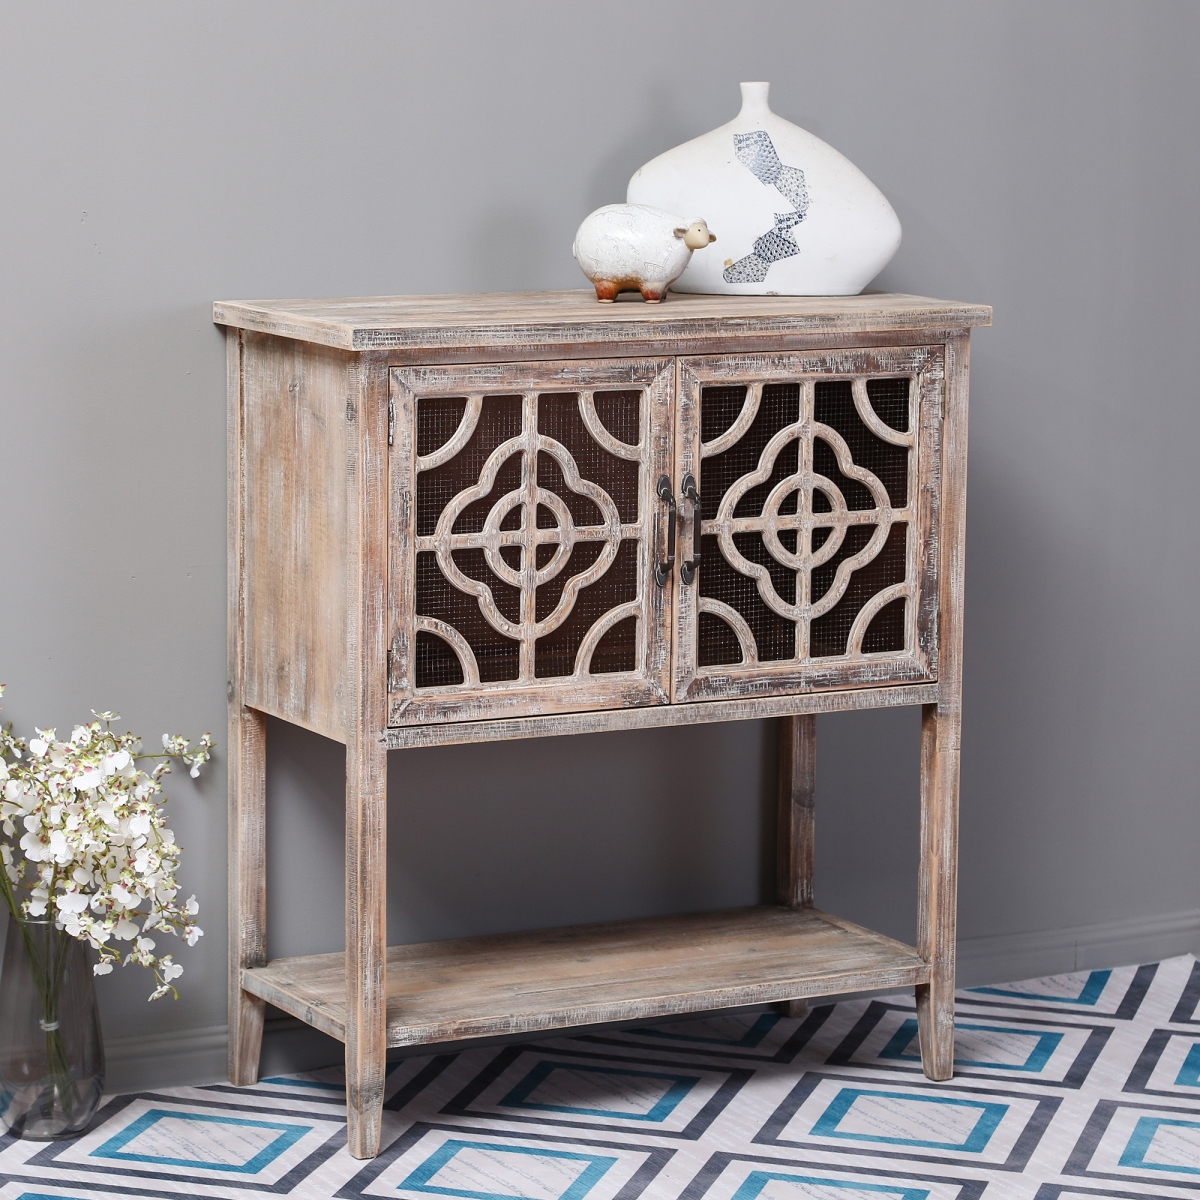 Luxen Home Whif367 36 X 31.7 In. Rustic Wood & Metal Double Door Console Table - Brown